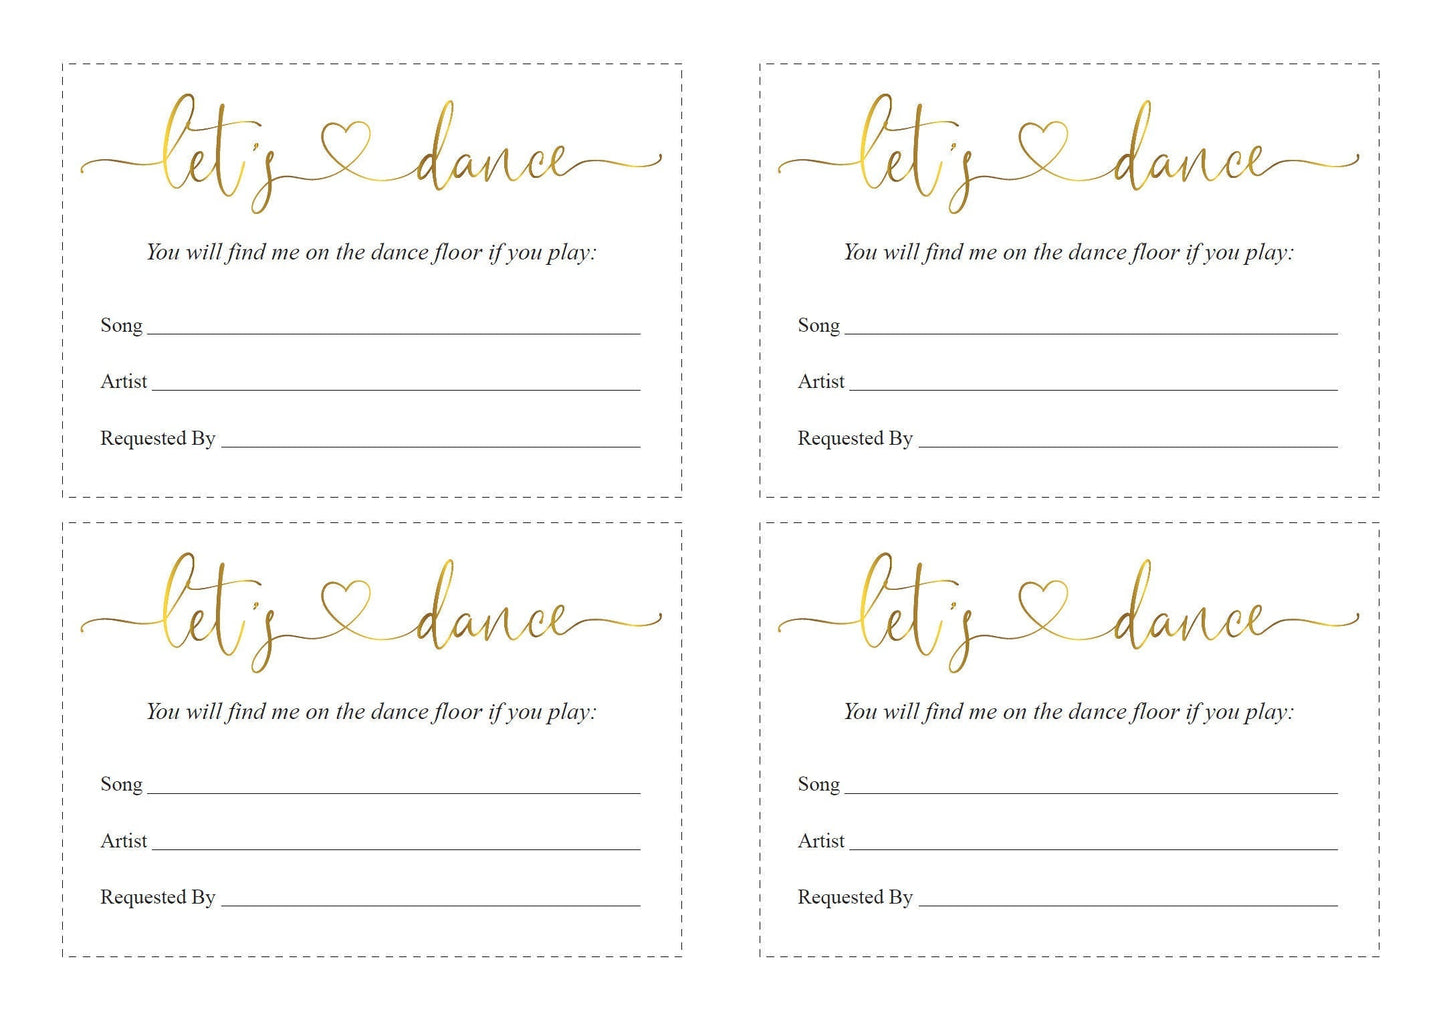 Let's dance card, Song Request Insert Card Template, Dancing Card, Dance Card, RSVP, Wedding Song Request, Gold  - Heather TAGS | TY | INSERTS SAVVY PAPER CO